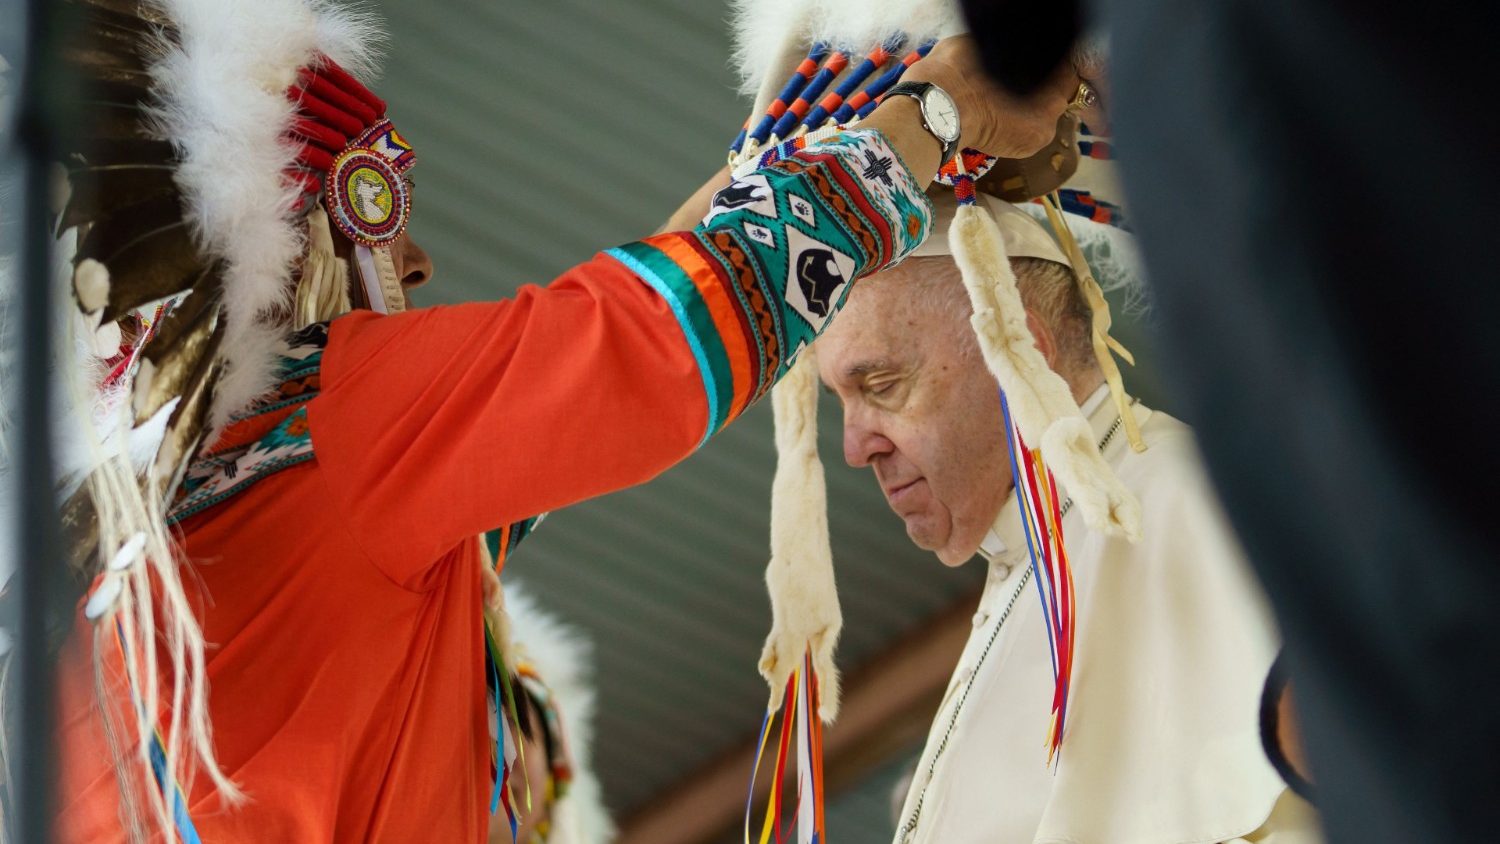 Pope pays tribute to indigenous people: "The spirit of community is very real"